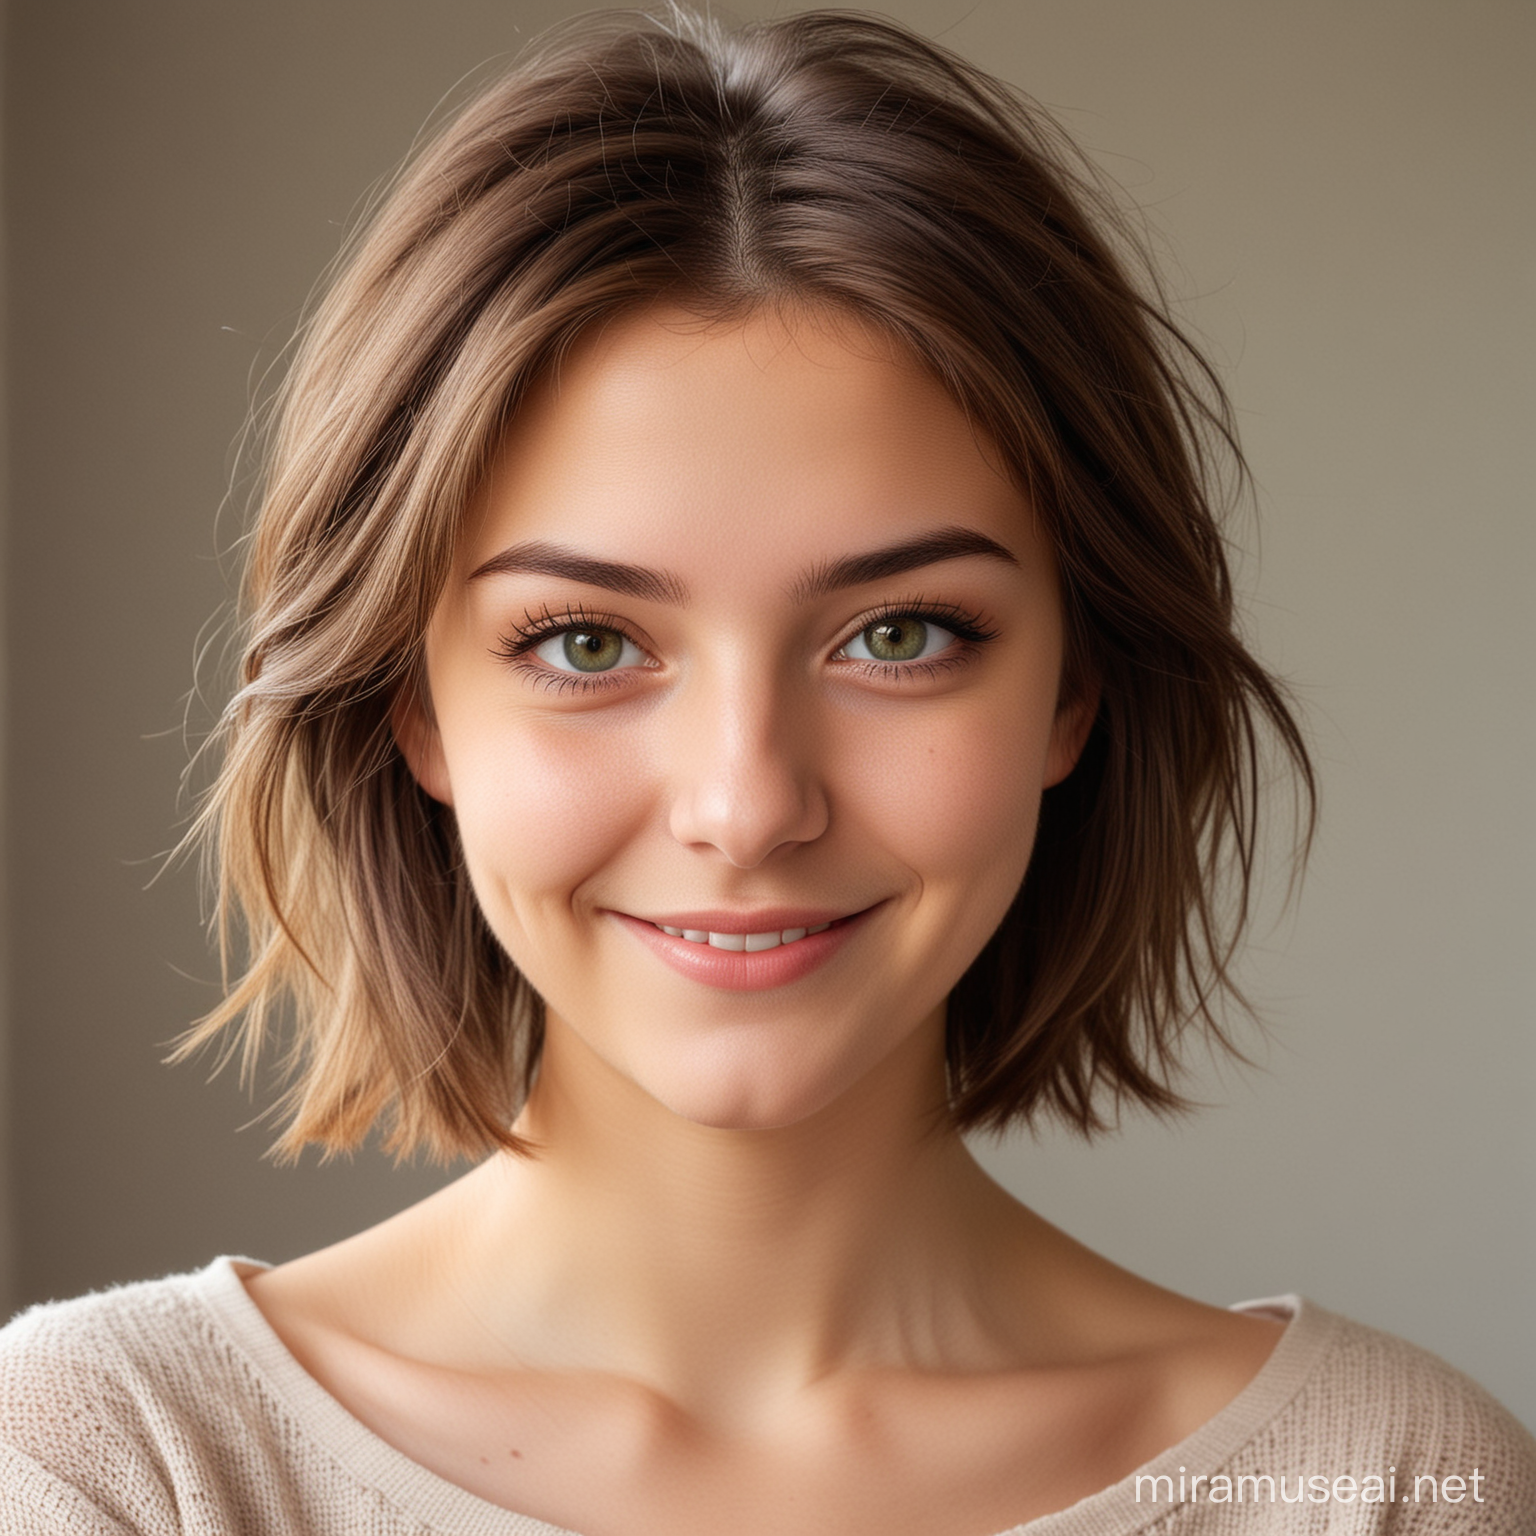 A pretty girl. She is 18 years old. She has short shoulder-length brown hair. Her eyes are green. She smirks mischievously